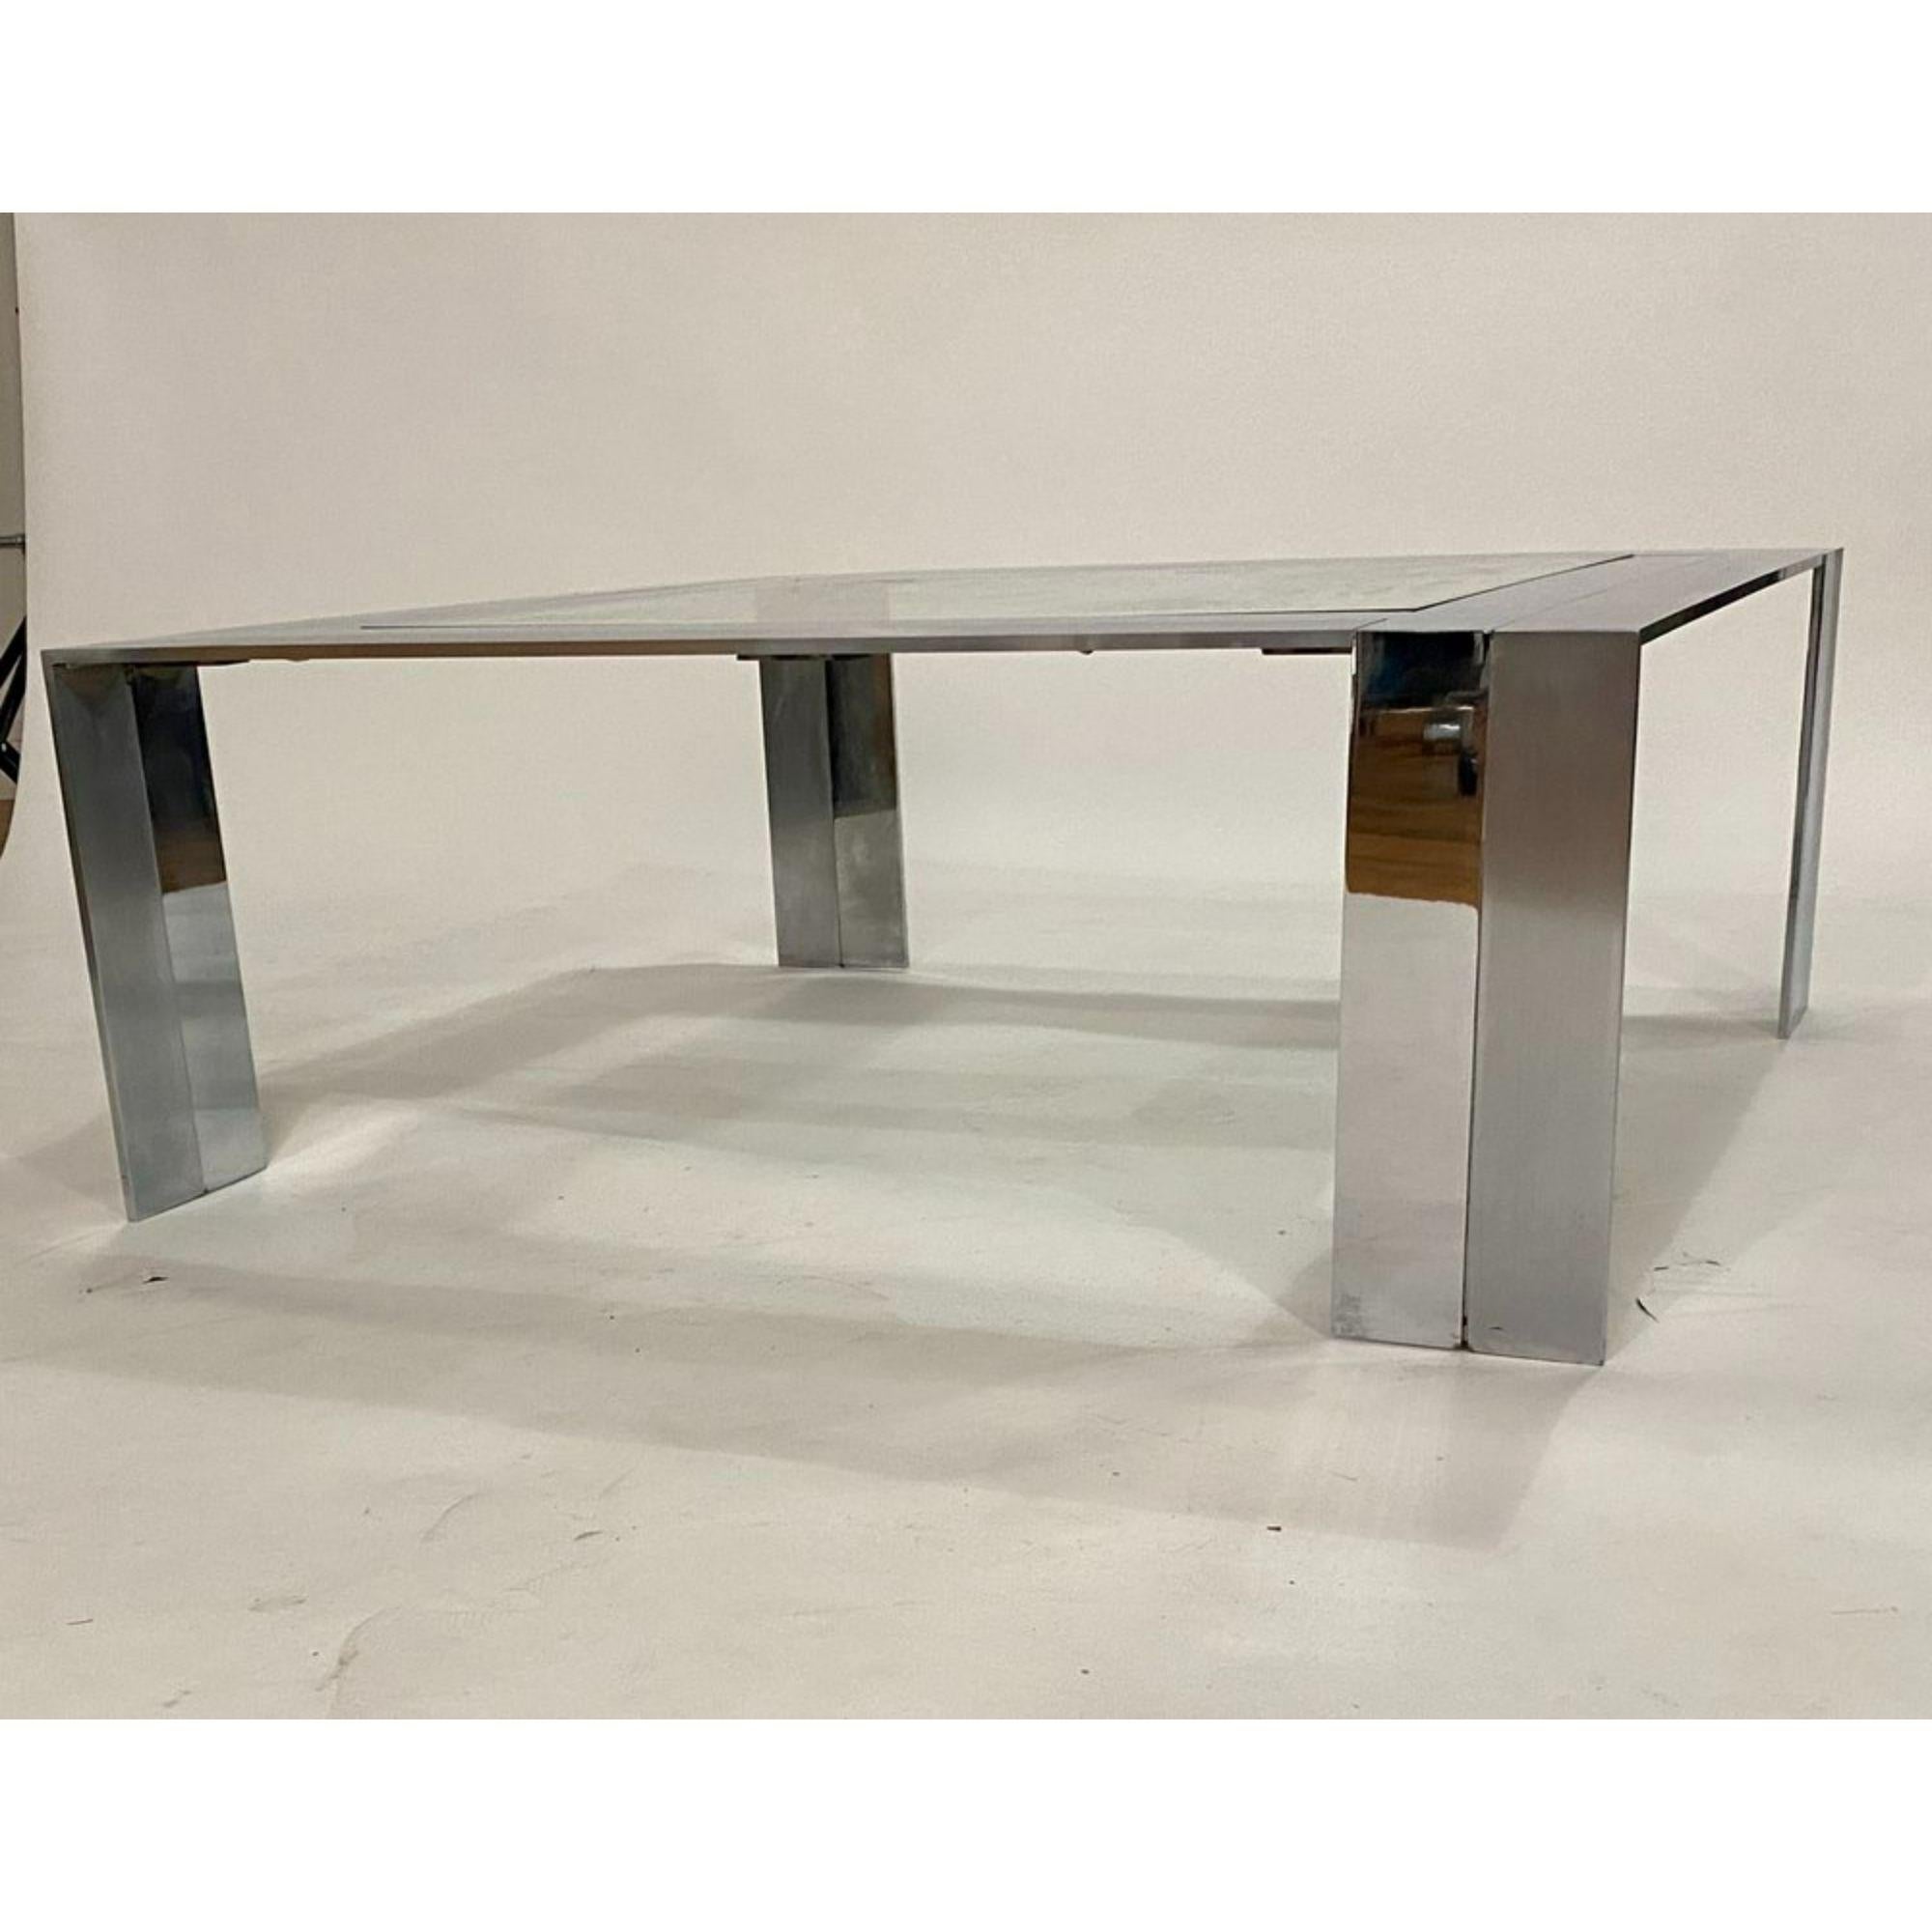 Post-modern steel and glass cocktail table by Elaine Cohen for DIA (Design Institute of America crafted from solid sleek bars of polished and brushed nickel and topped with a square glass. The table is very solid and heavy and in very good